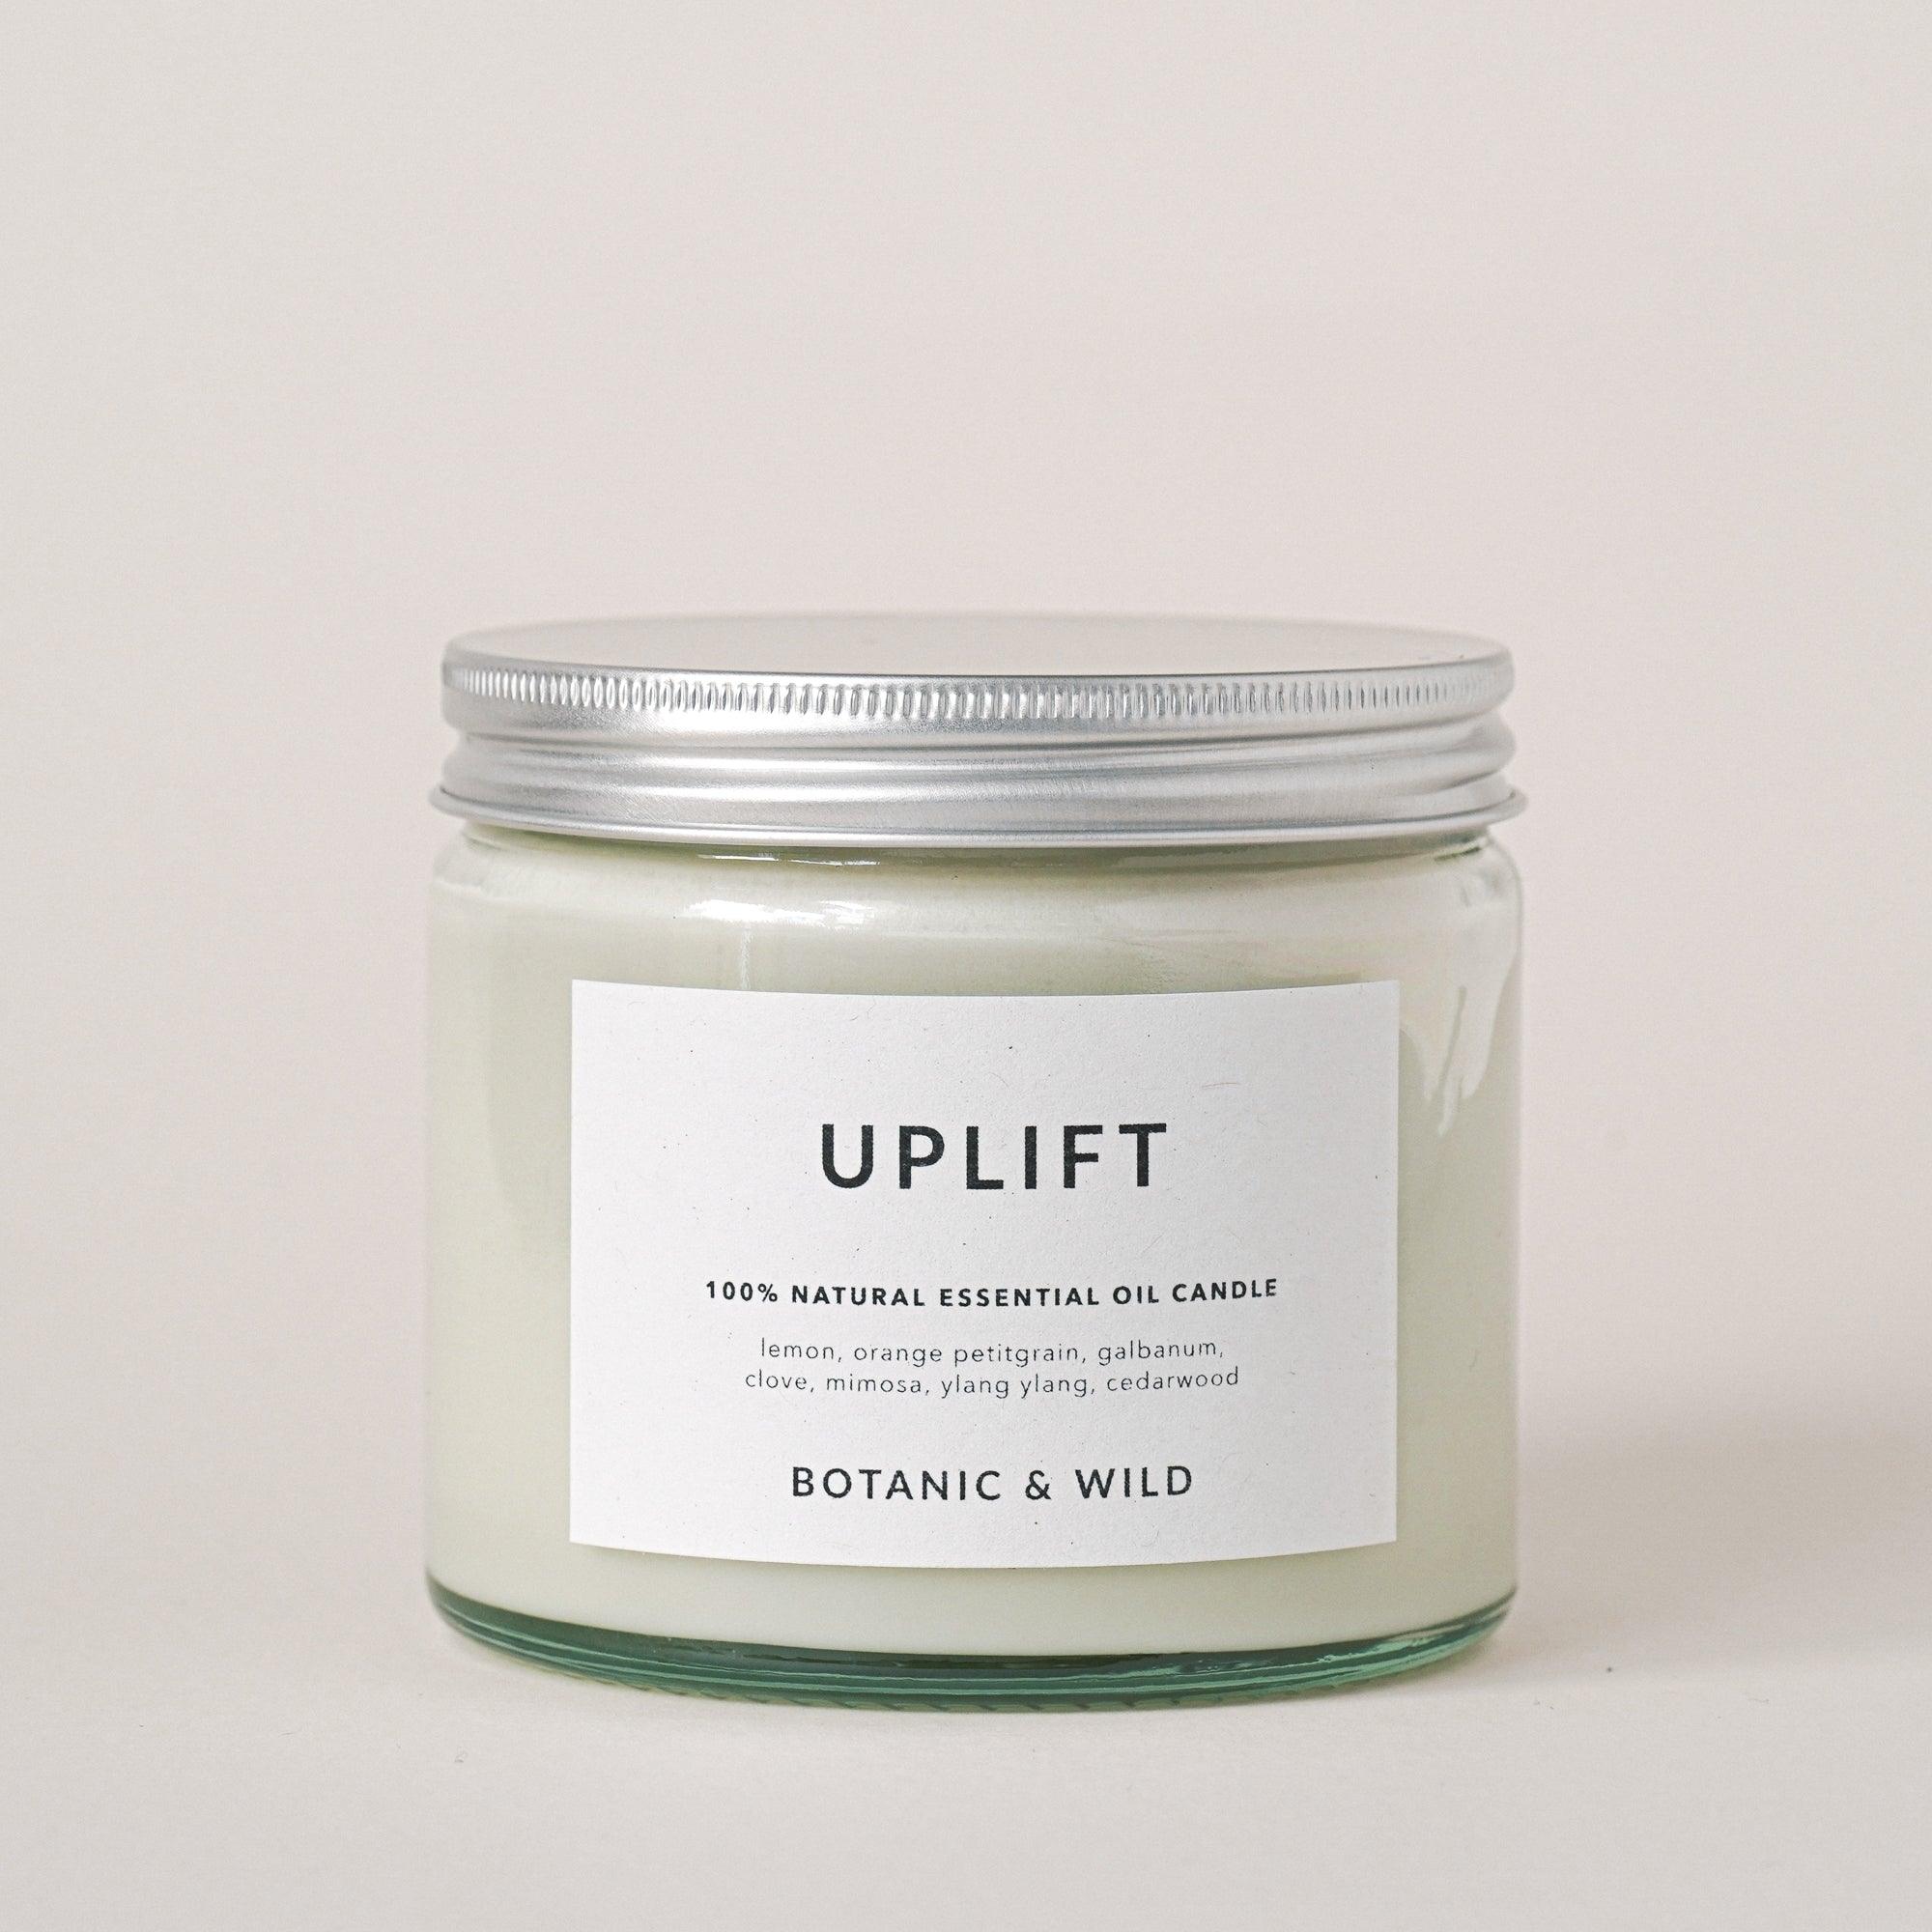 UPLIFT Essential Oil Soy Candles - Botanic & Wild